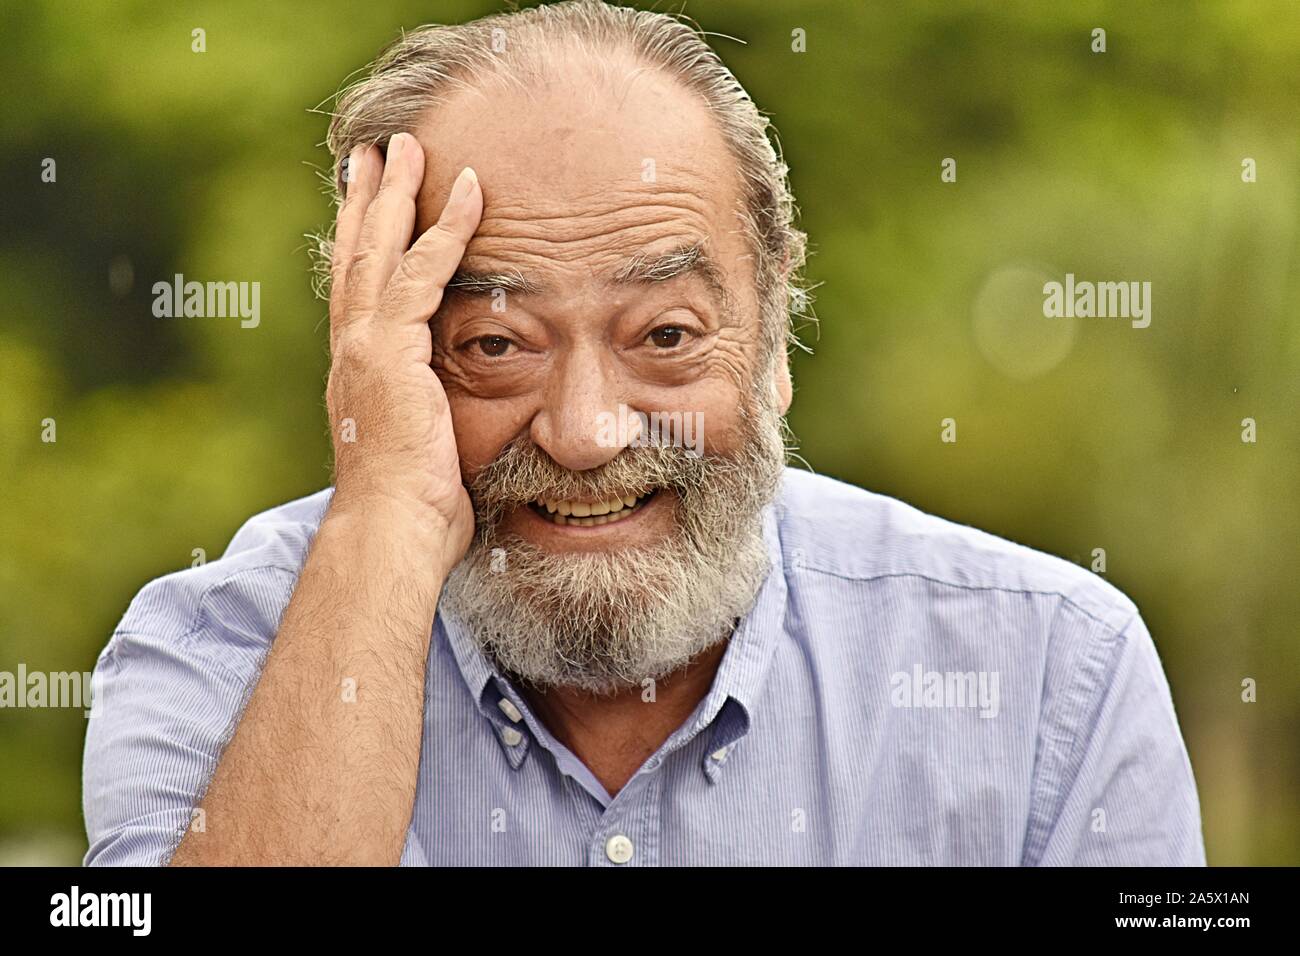 Forgetful Old Male Stock Photo